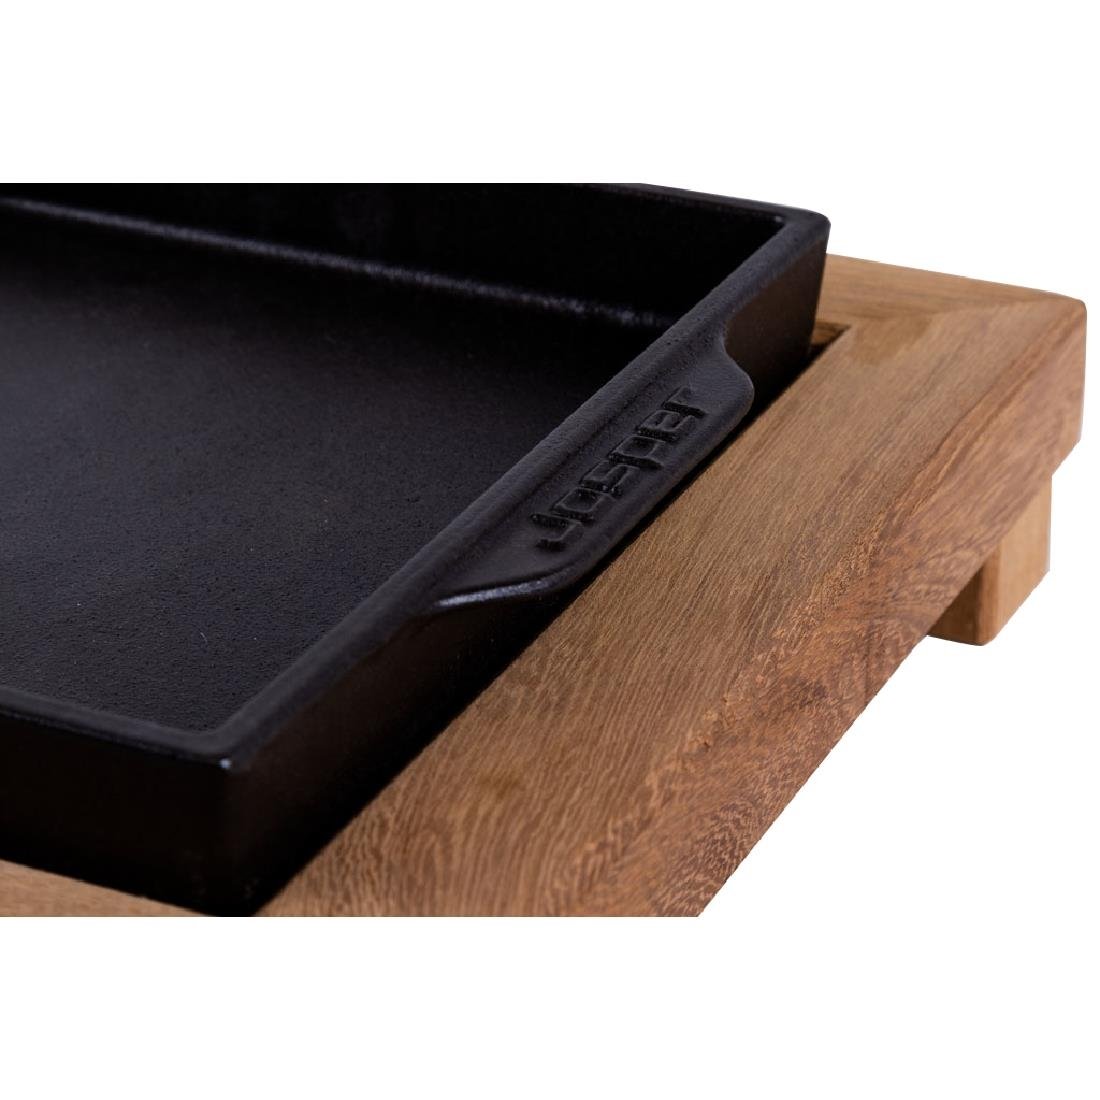 AT330 Josper Charcoal Oven Cast Iron Service Tray and Platter 300x200mm